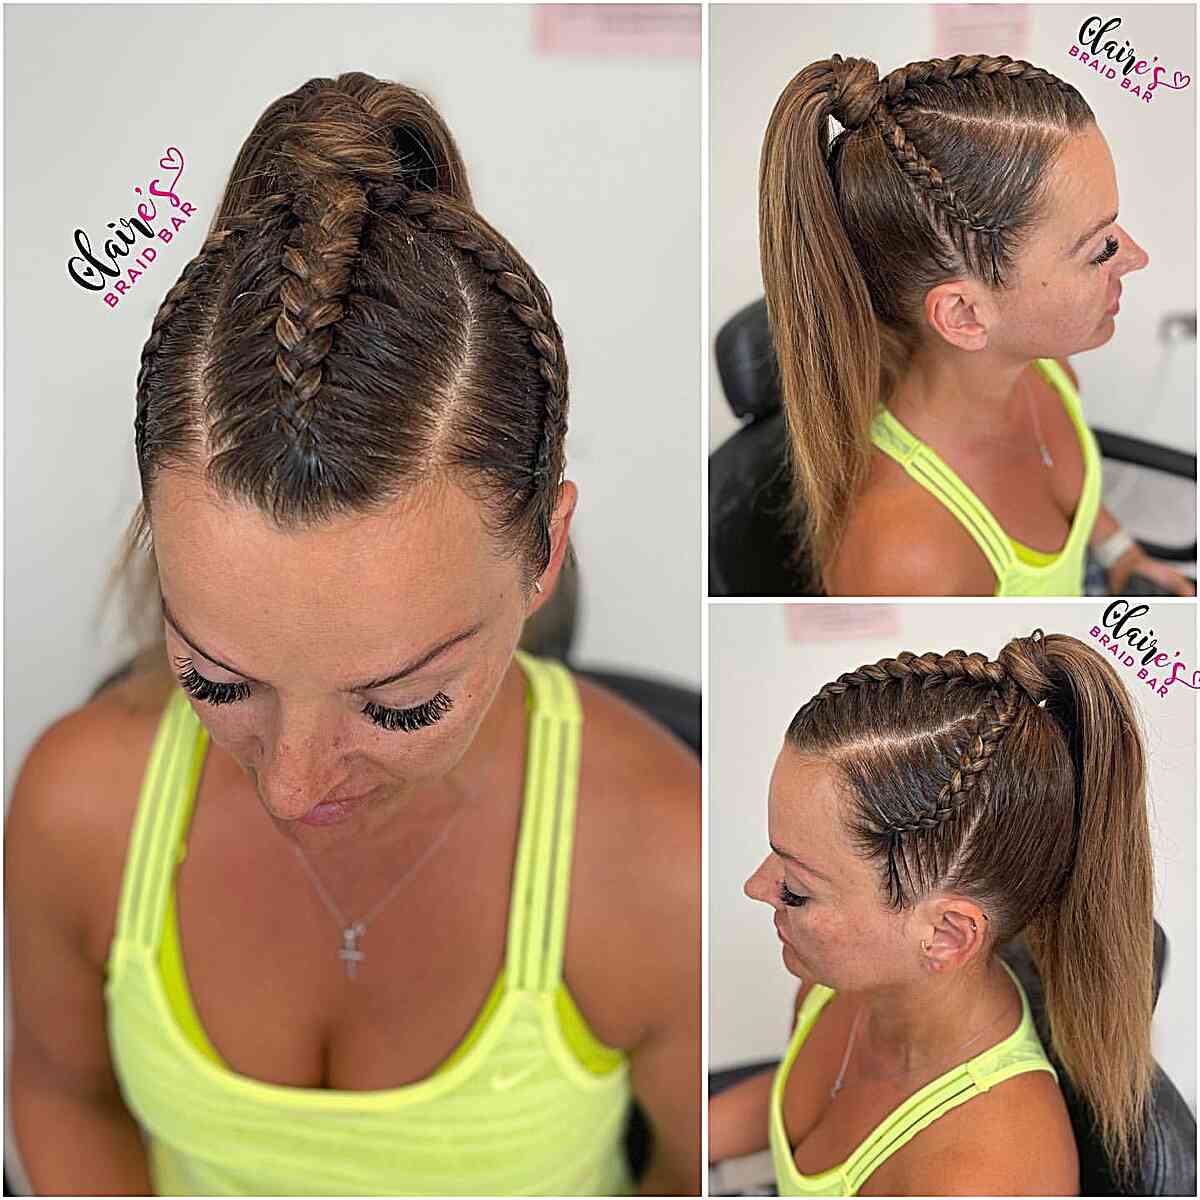 Sleek High Pony with Dutch Braids for Volleyball Athletes